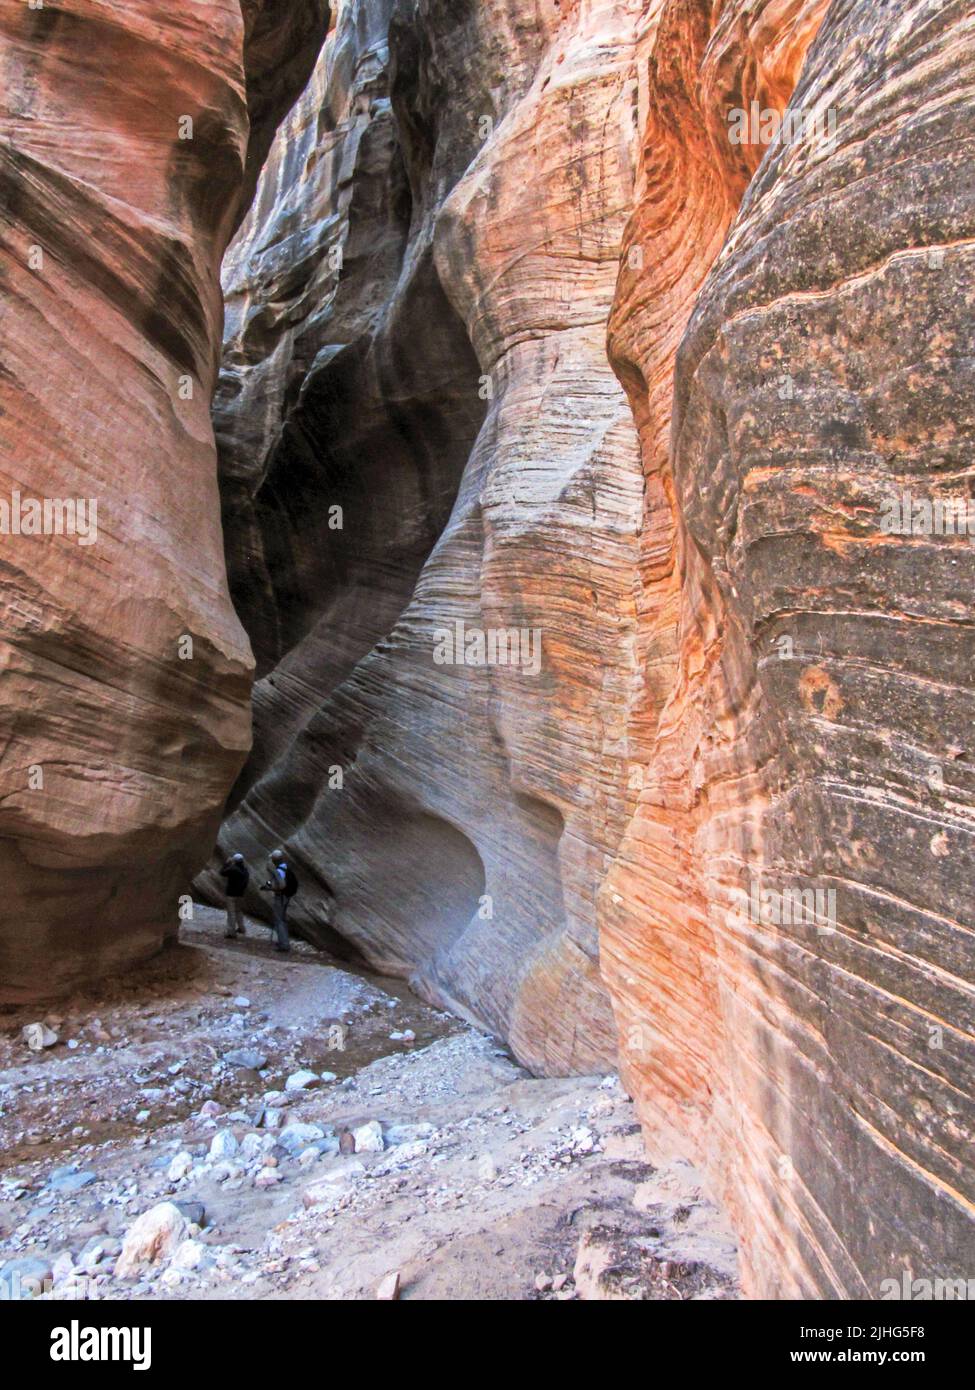 Two hikers, deep within one of the narrow Slot Canyons of Willis Creek in Utah, USA, Stock Photo